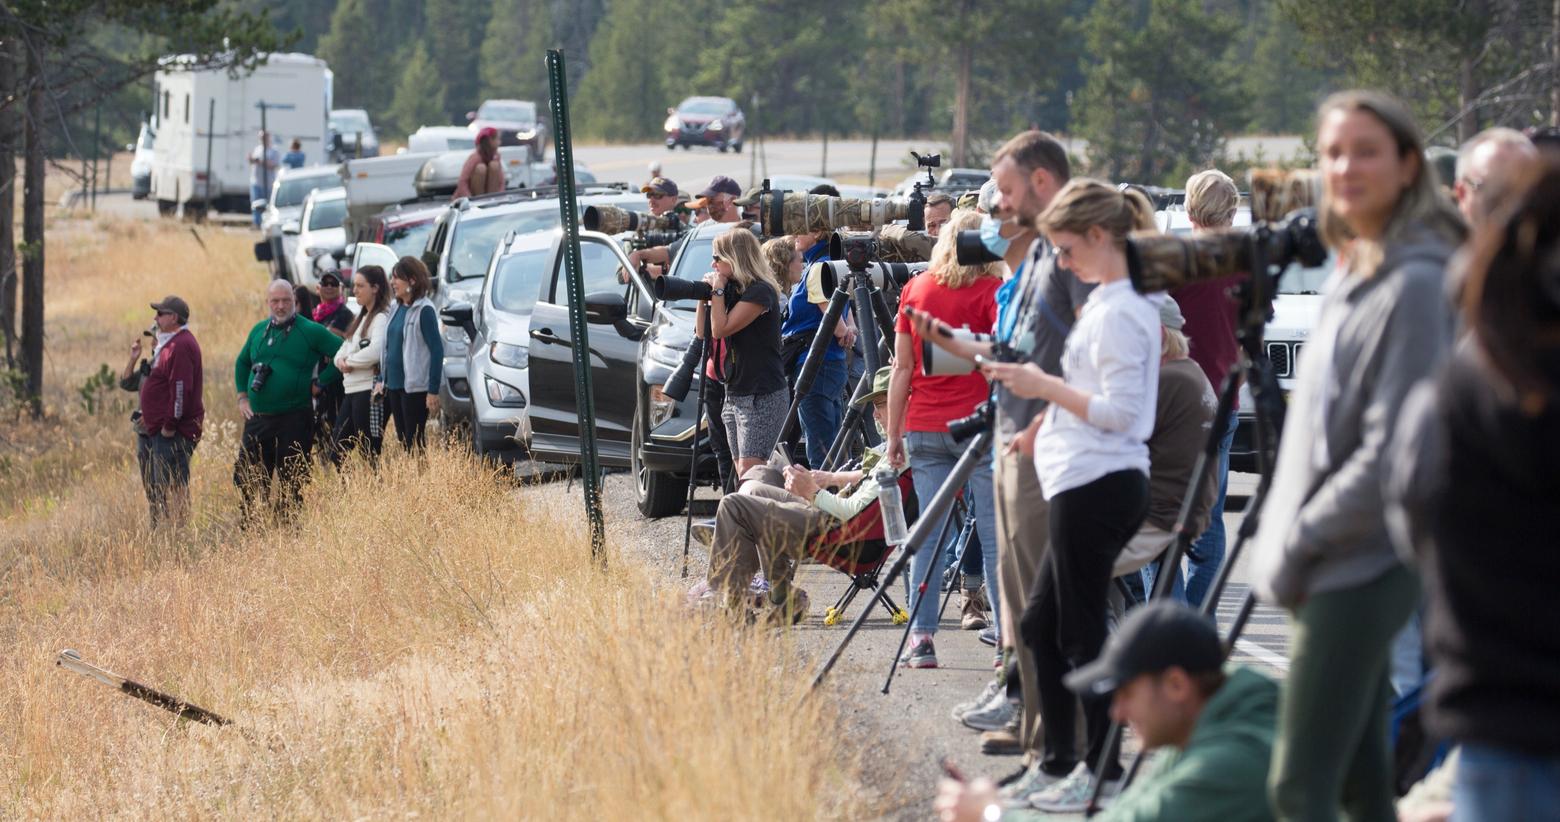 It's true: Yellowstone and Grand Teton national parks are crowded every summer. It's great that they are popular; it shows that people care. But record crowds in both parks are now overwhelming resources along the front country. Here, bear watchers mass along a highway in Grand Teton hoping to catch a glimpse of famous Jackson Hole grizzly 399 and her cubs in September 2020. Photo Shuttersock 1827517454 